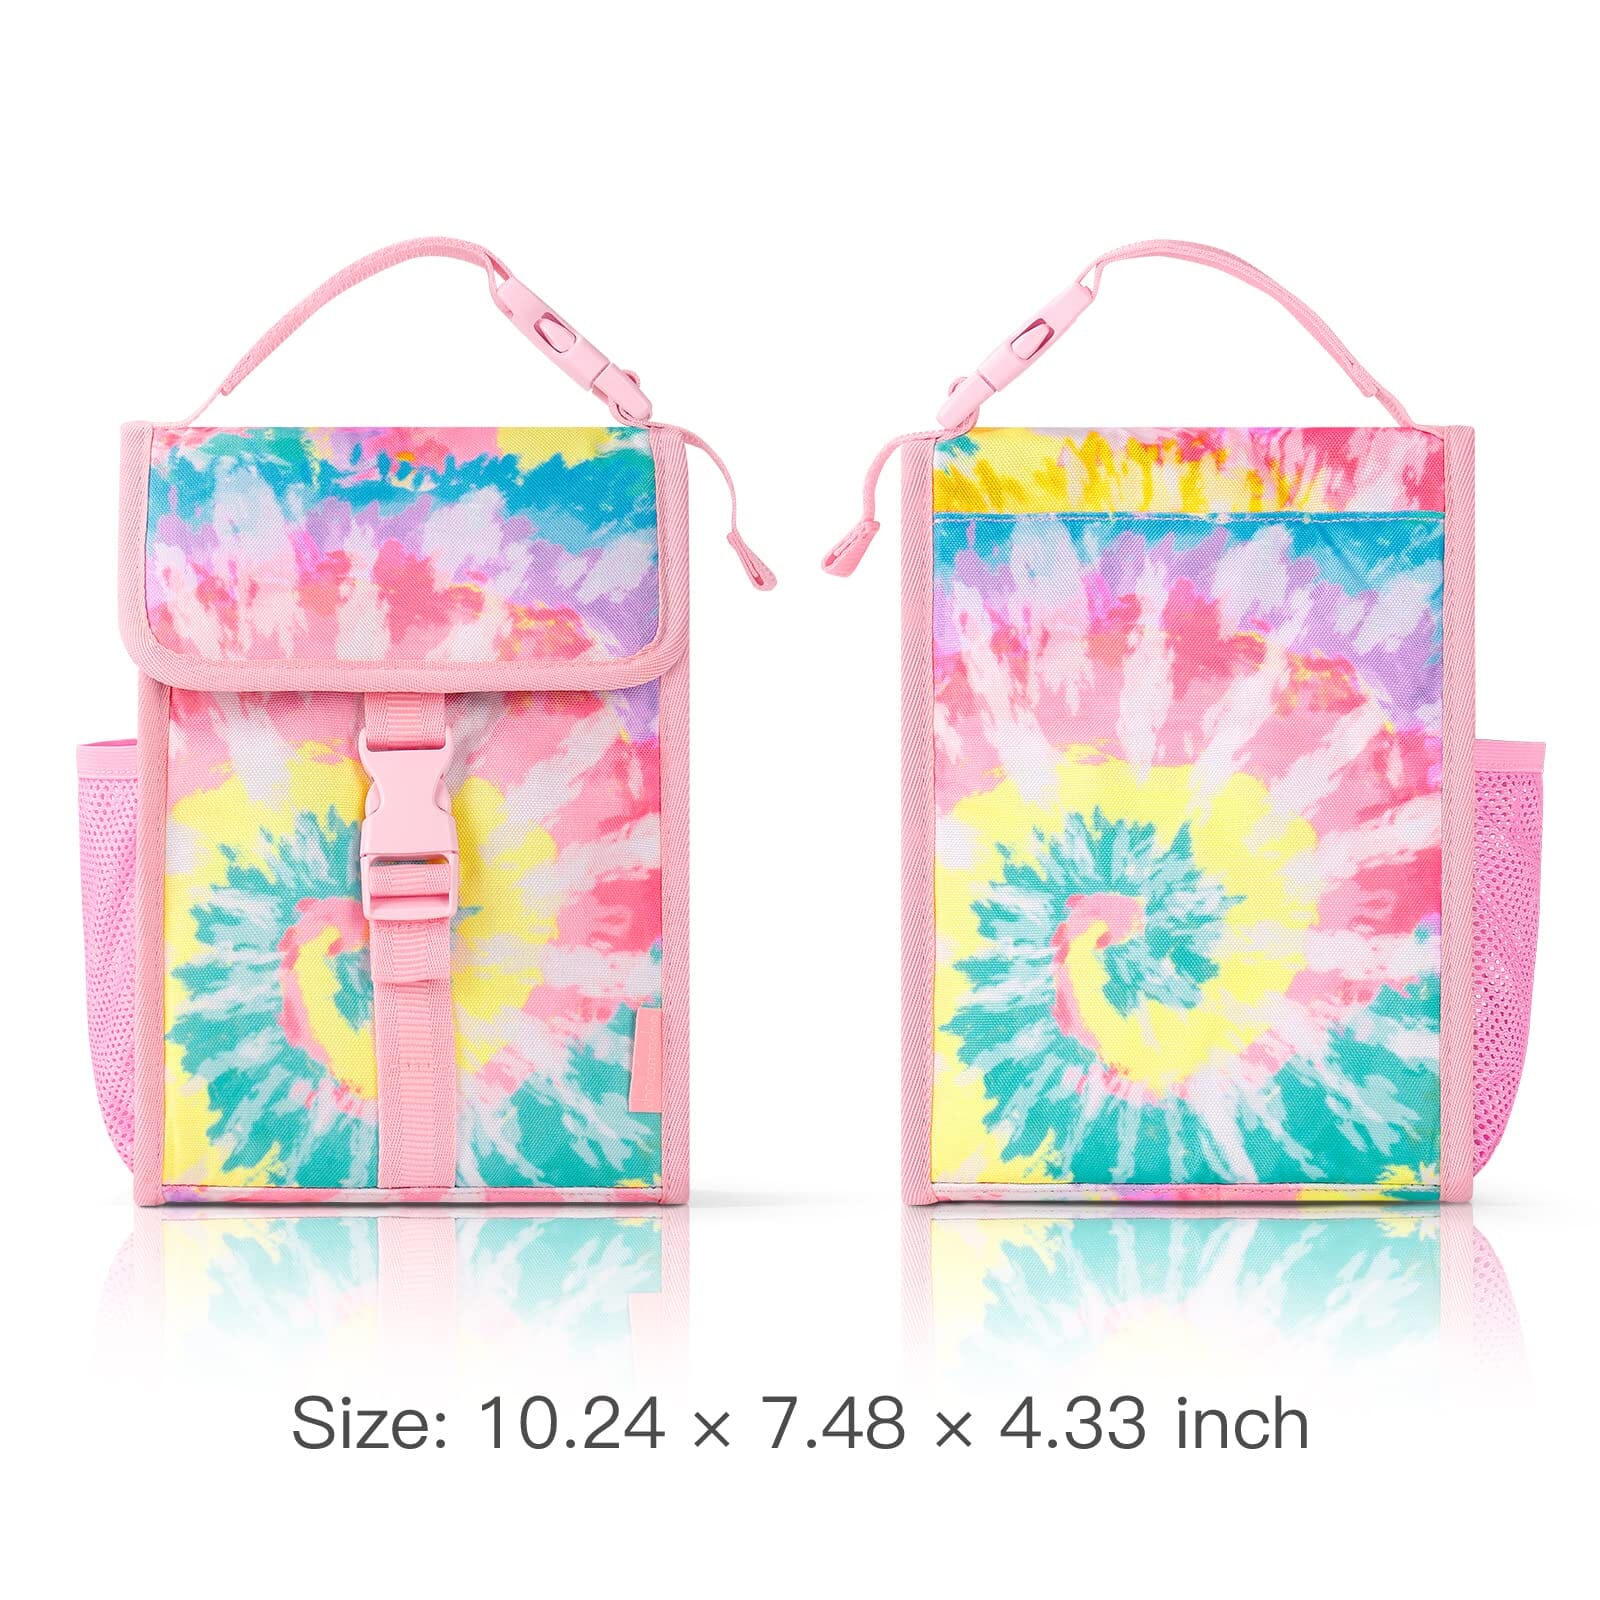 Choco Mocha Tie Dye Lunch Box for Girls Preschool Elementary Daycare, Reusable Insulated Girls Lunch Bag with Water Bottle Holder for Kids Toddler Travel, Colorful chocomochakids 